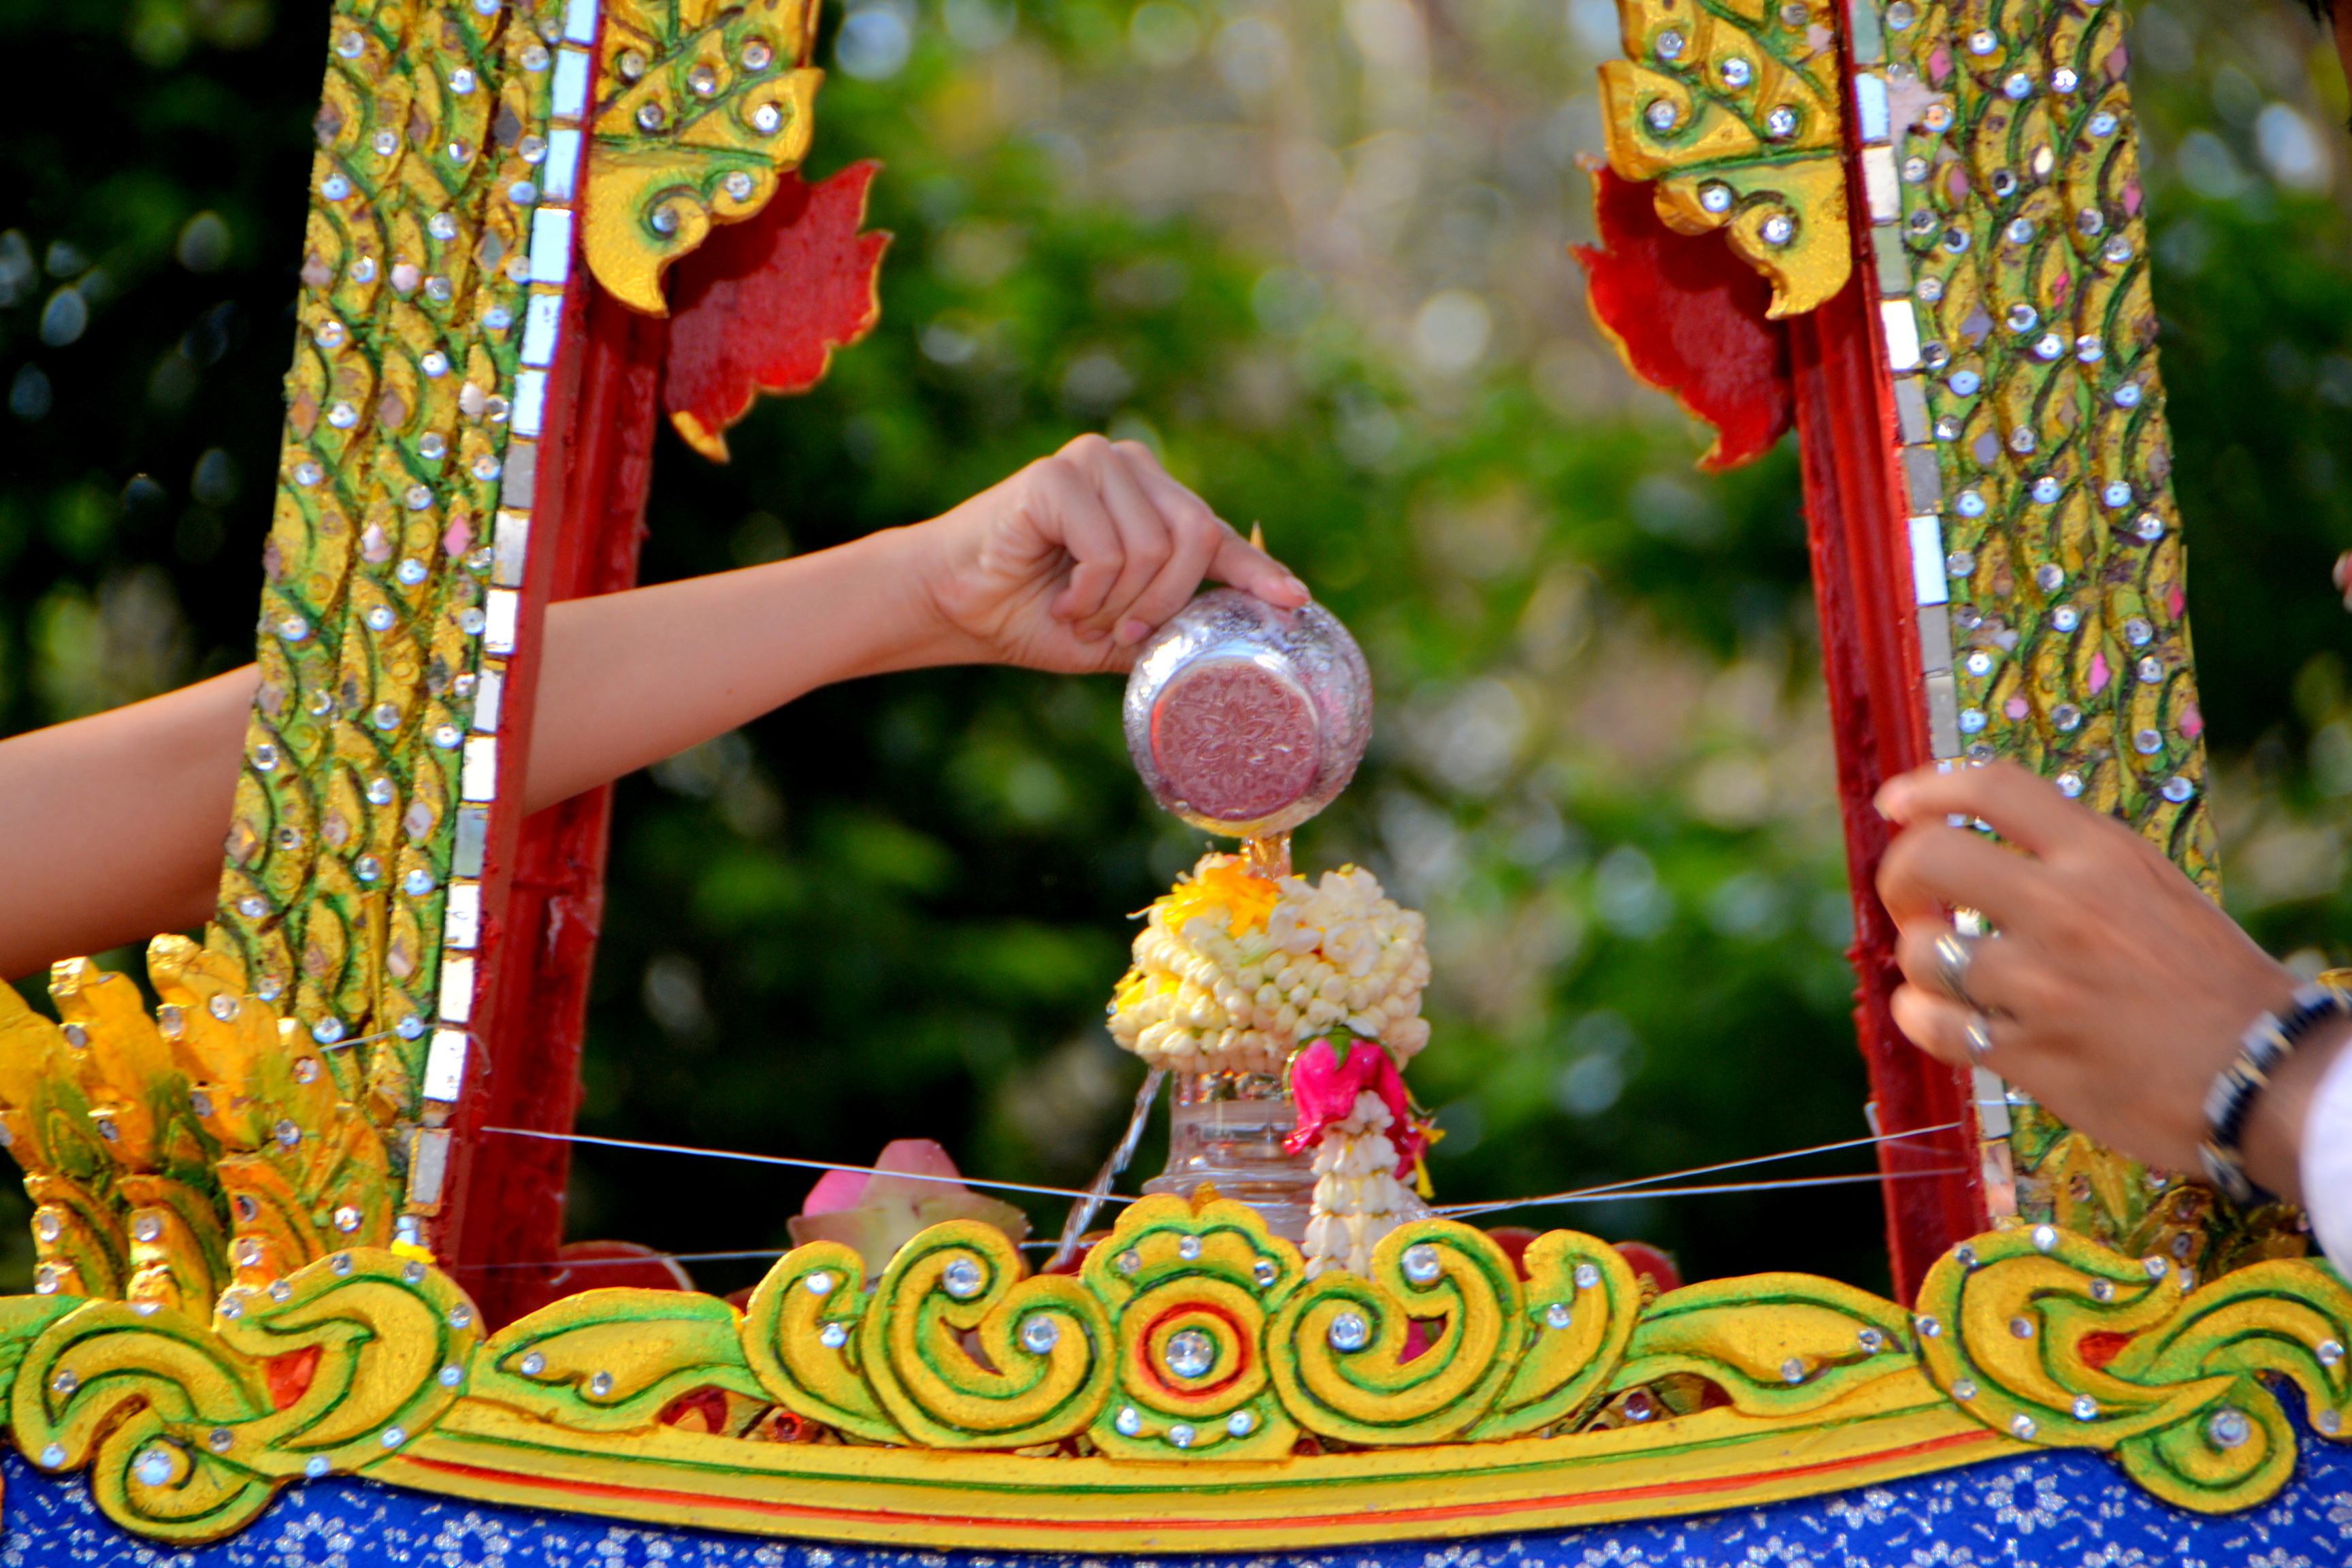 The parade gives residents and tourists an opportunity to pour holy water the relics on Songkran Day.